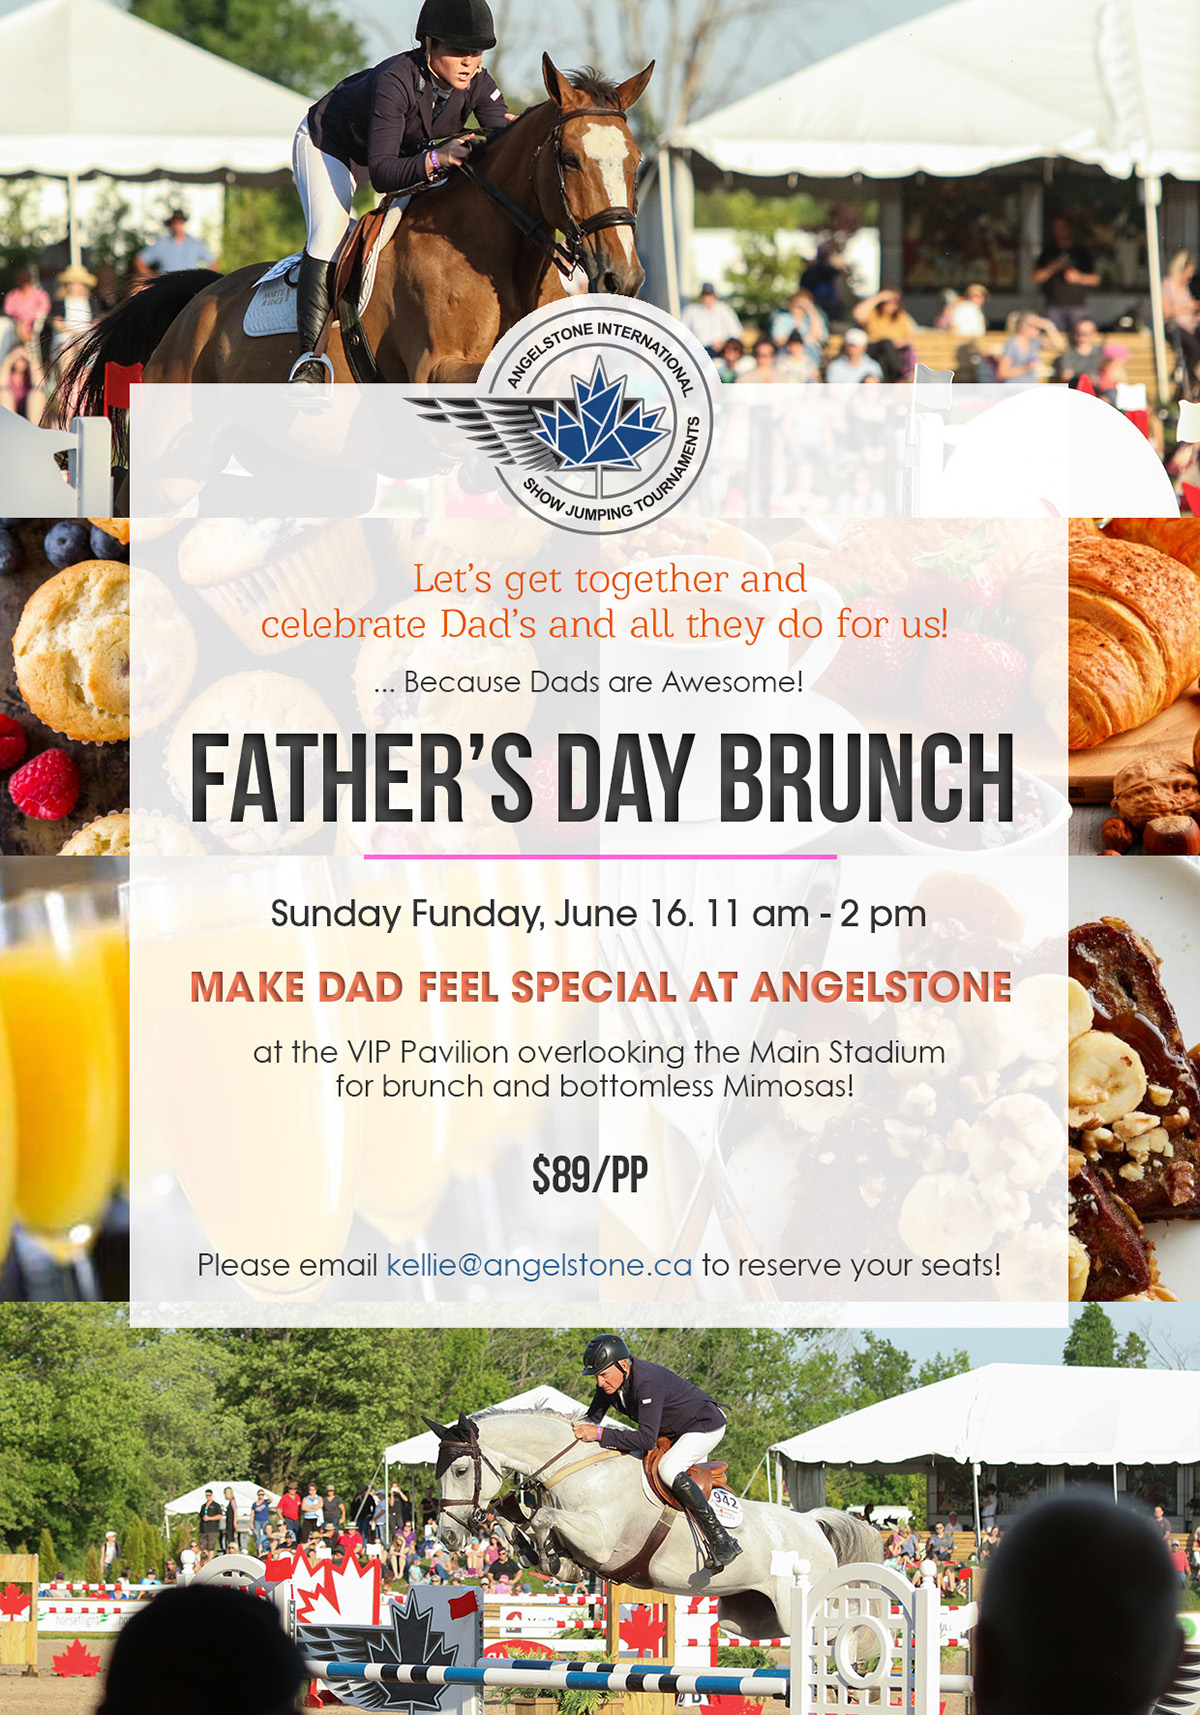 Father's Day Brunch at Angelstone